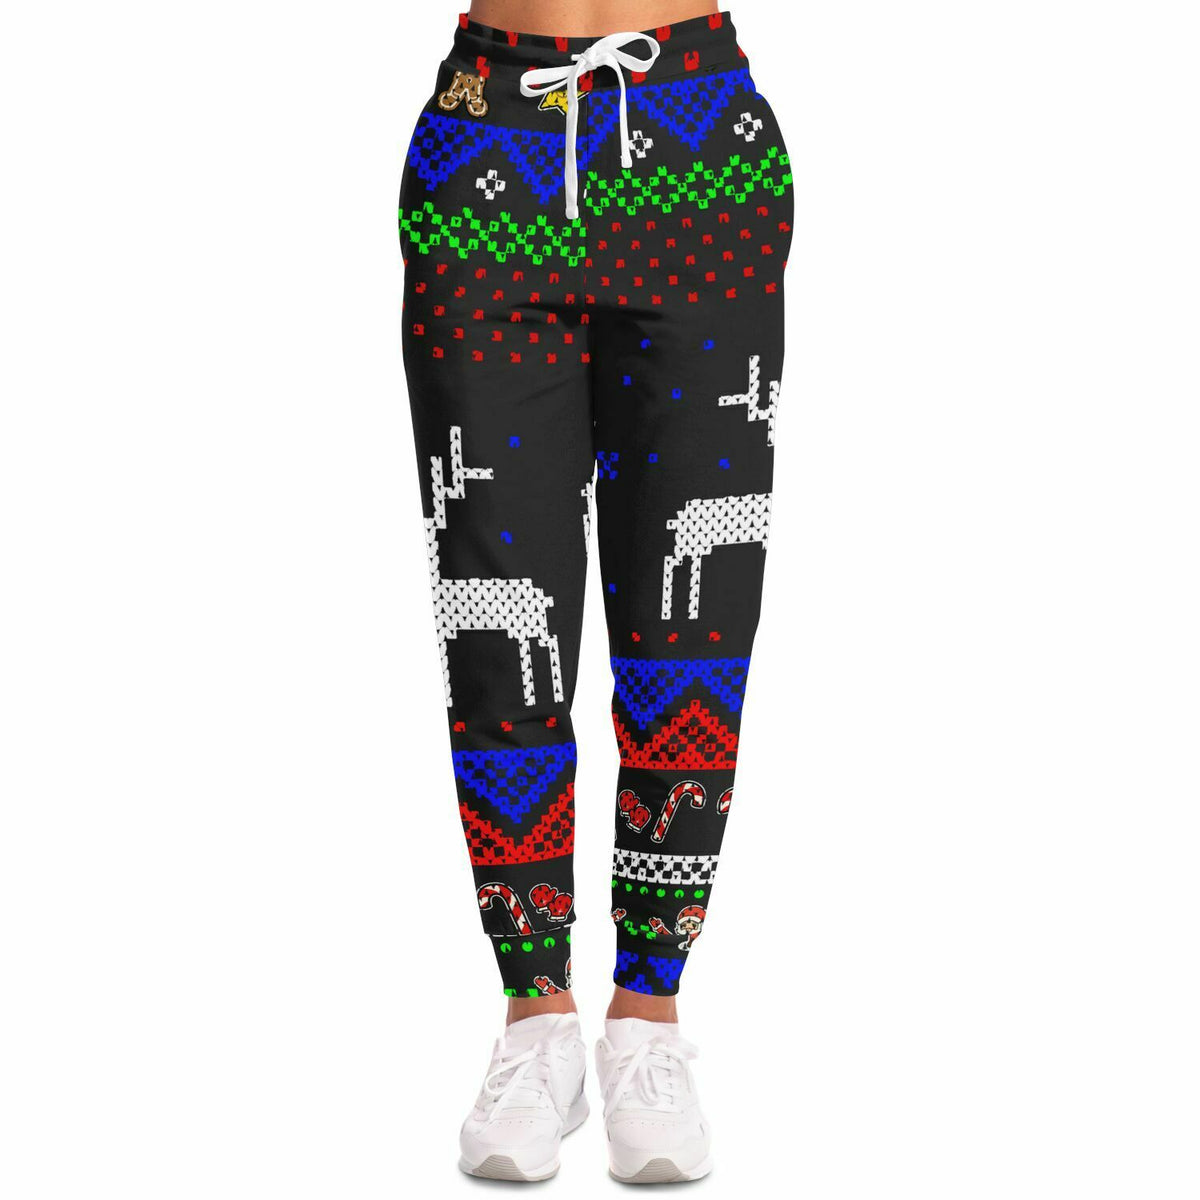 Don't Stop Believing - Christmas Joggers